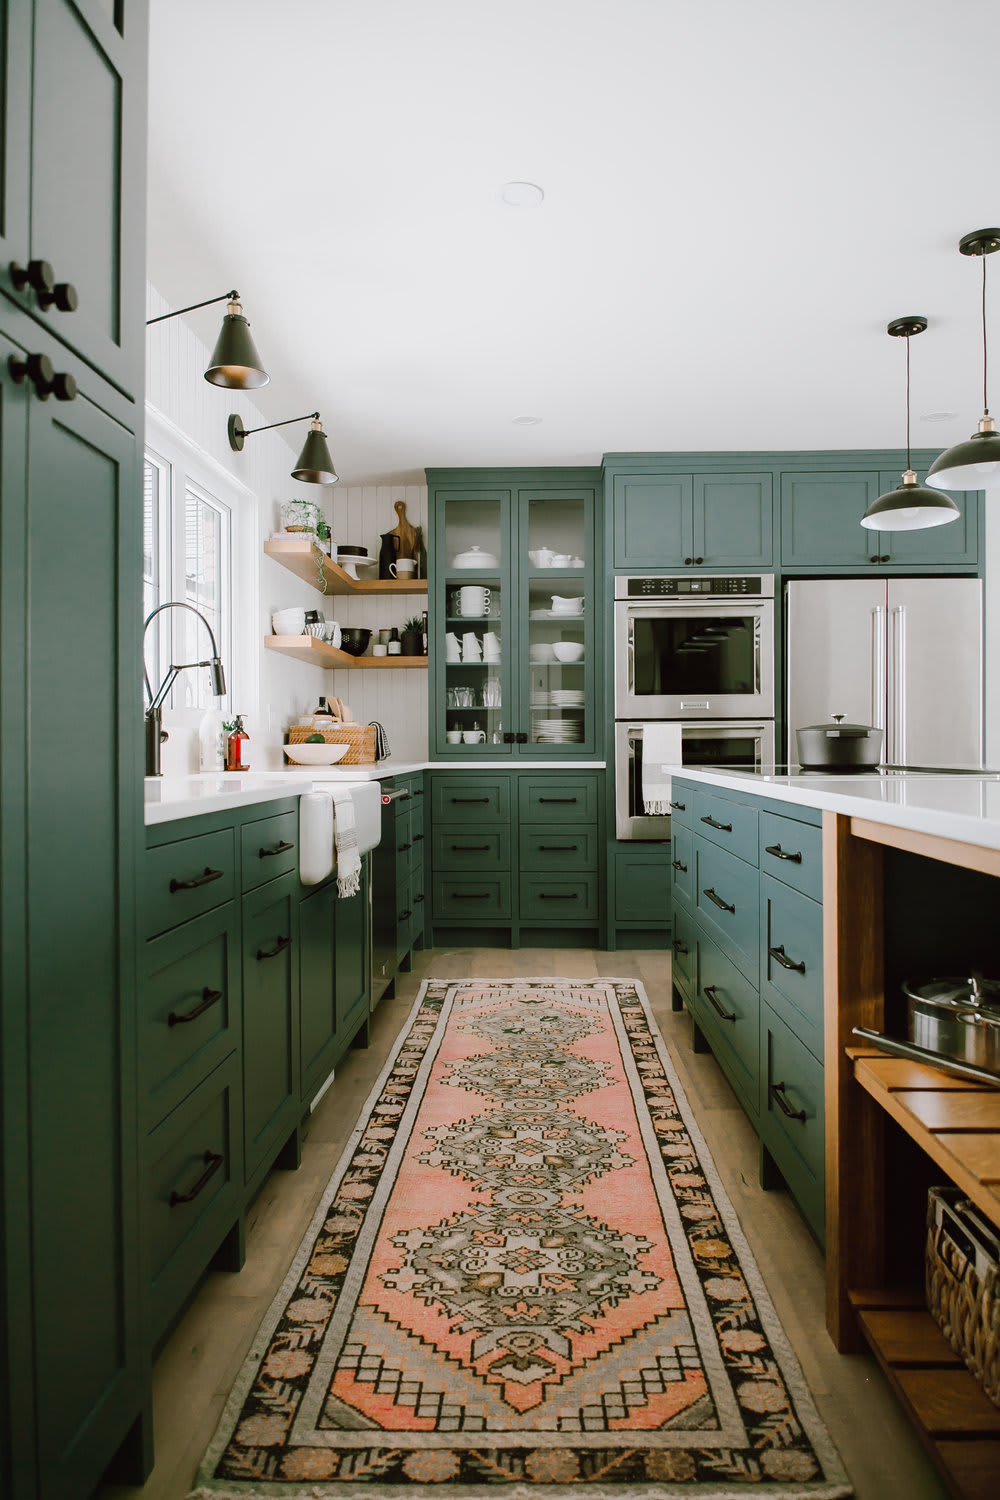 6 Unique Kitchen Cabinets to Upgrade Your Design